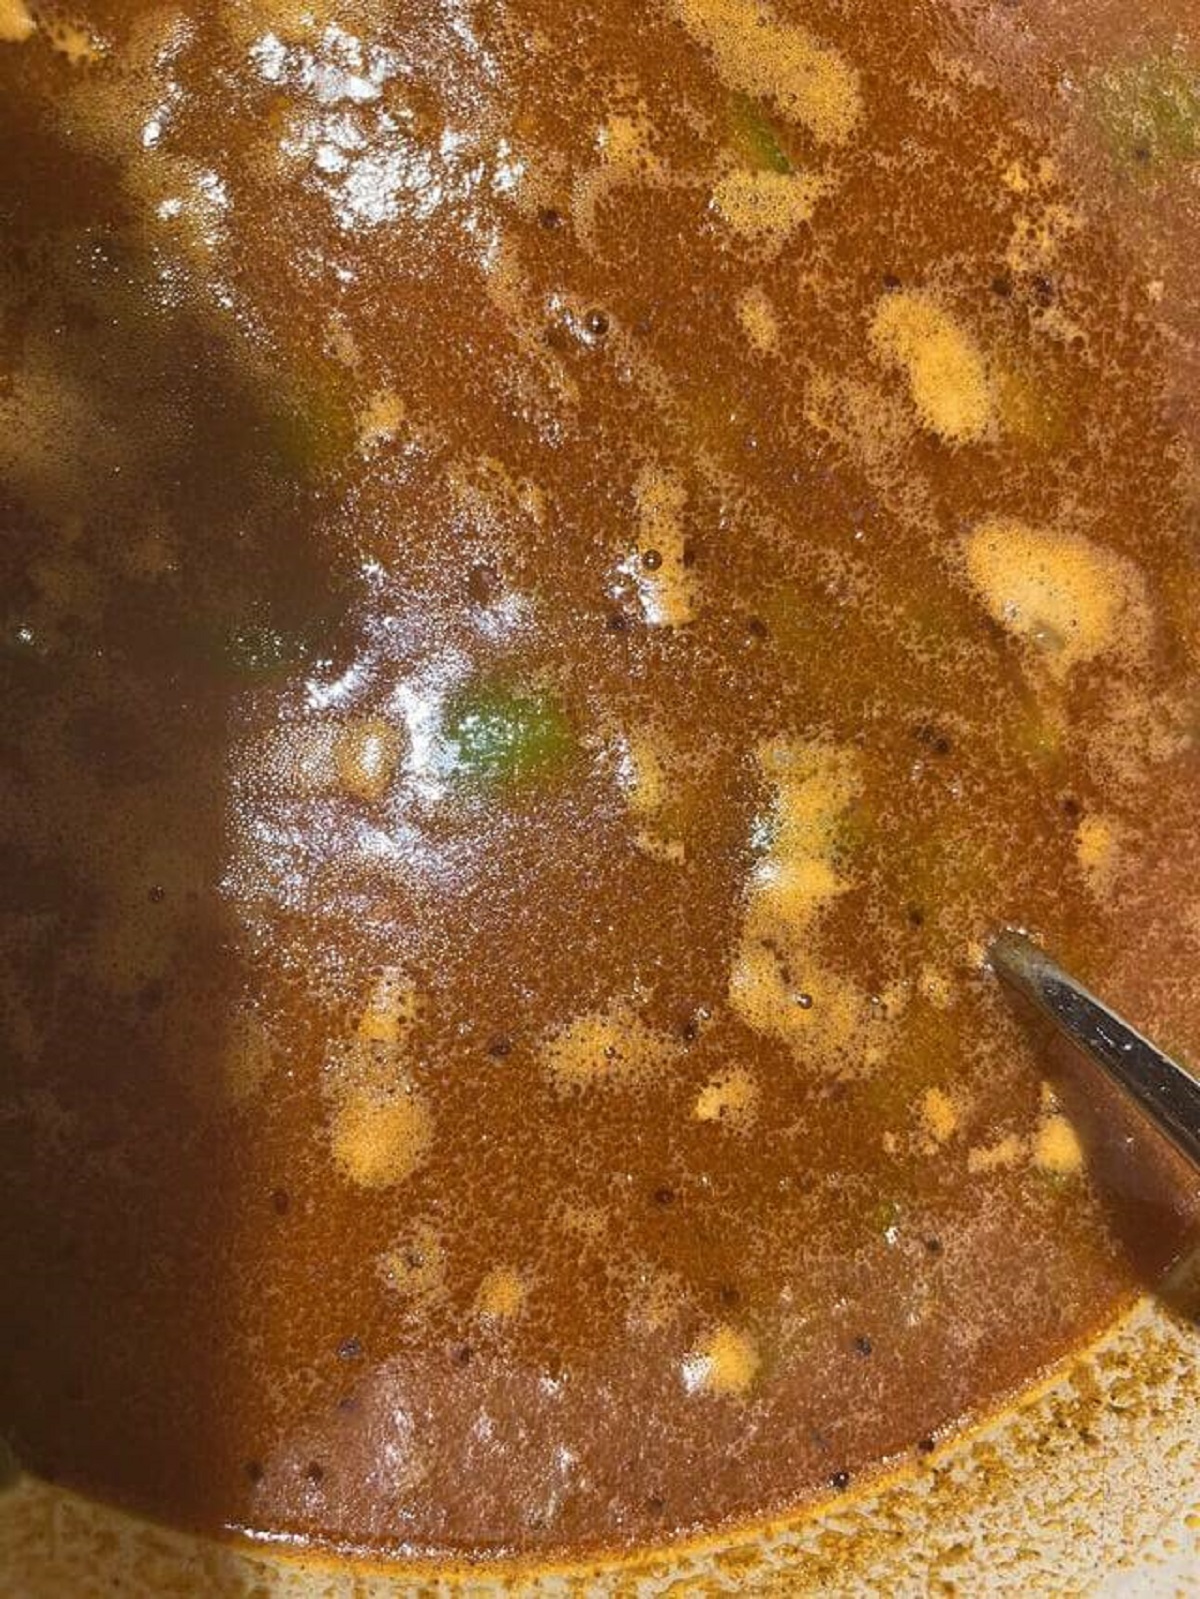 "I was just trying to make some chili when I noticed the pantry beetles floating in their spicy hot tub"